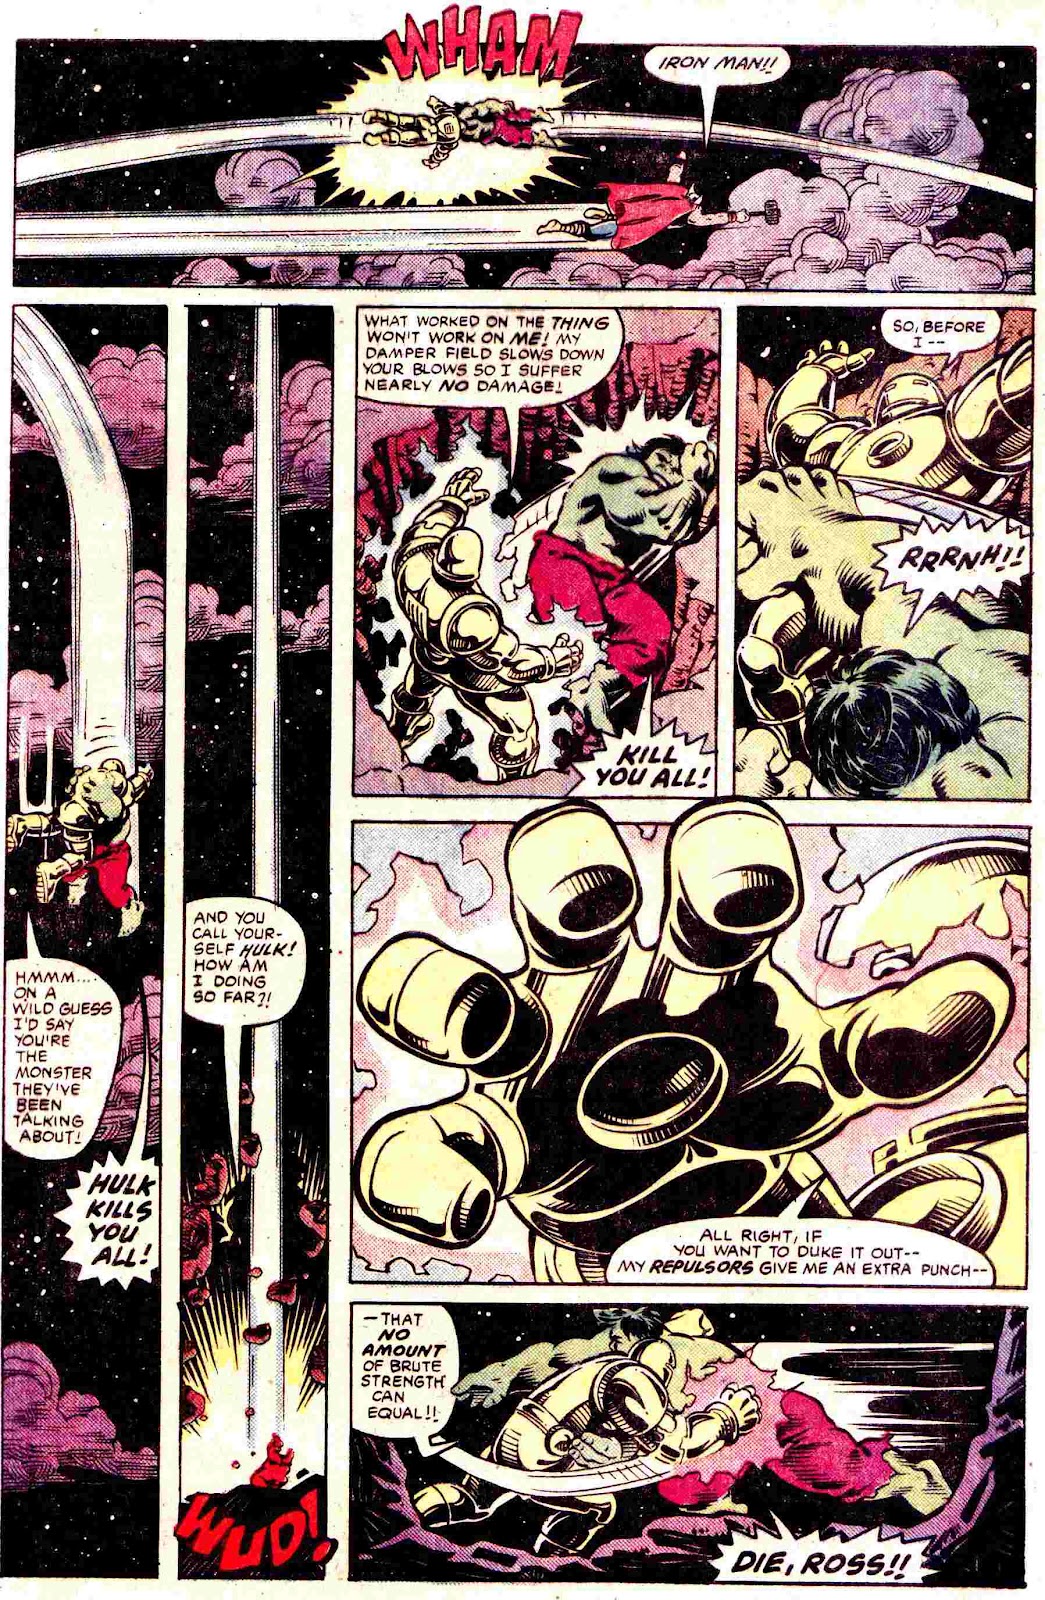 What If? (1977) issue 45 - The Hulk went Berserk - Page 37